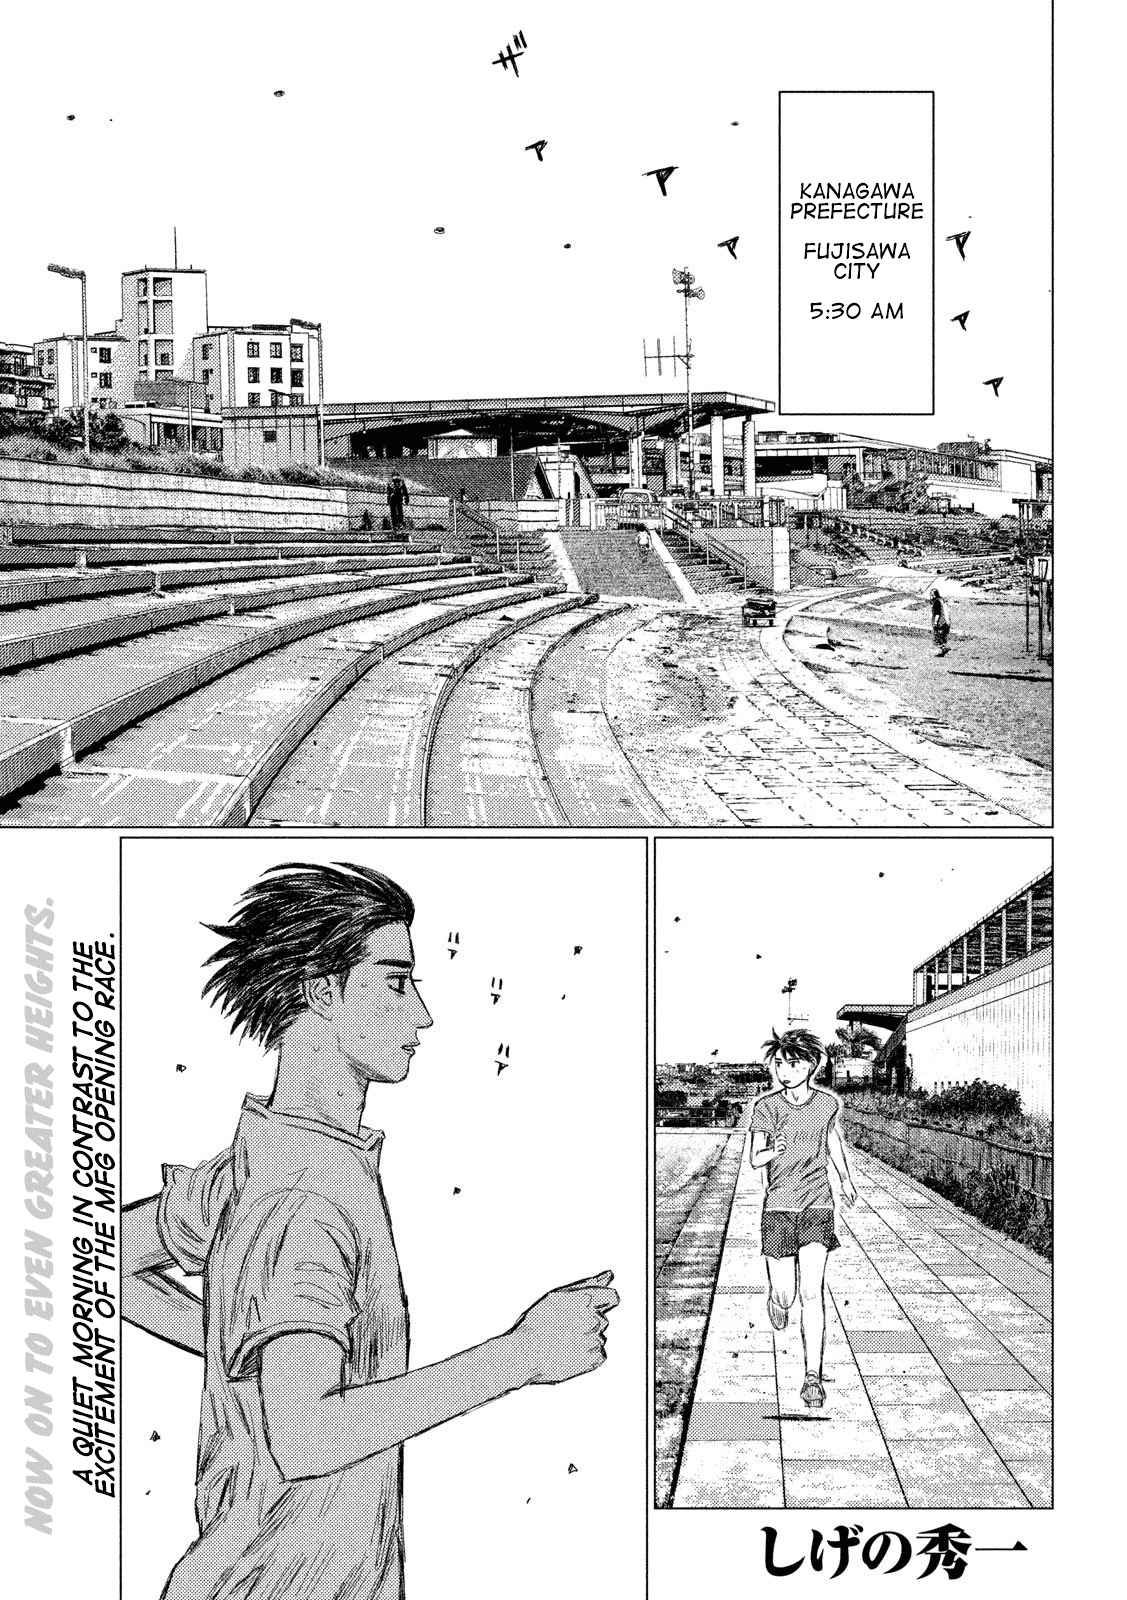 MF Ghost Vol. 4 Ch. 45 Peaceful Everyday Life